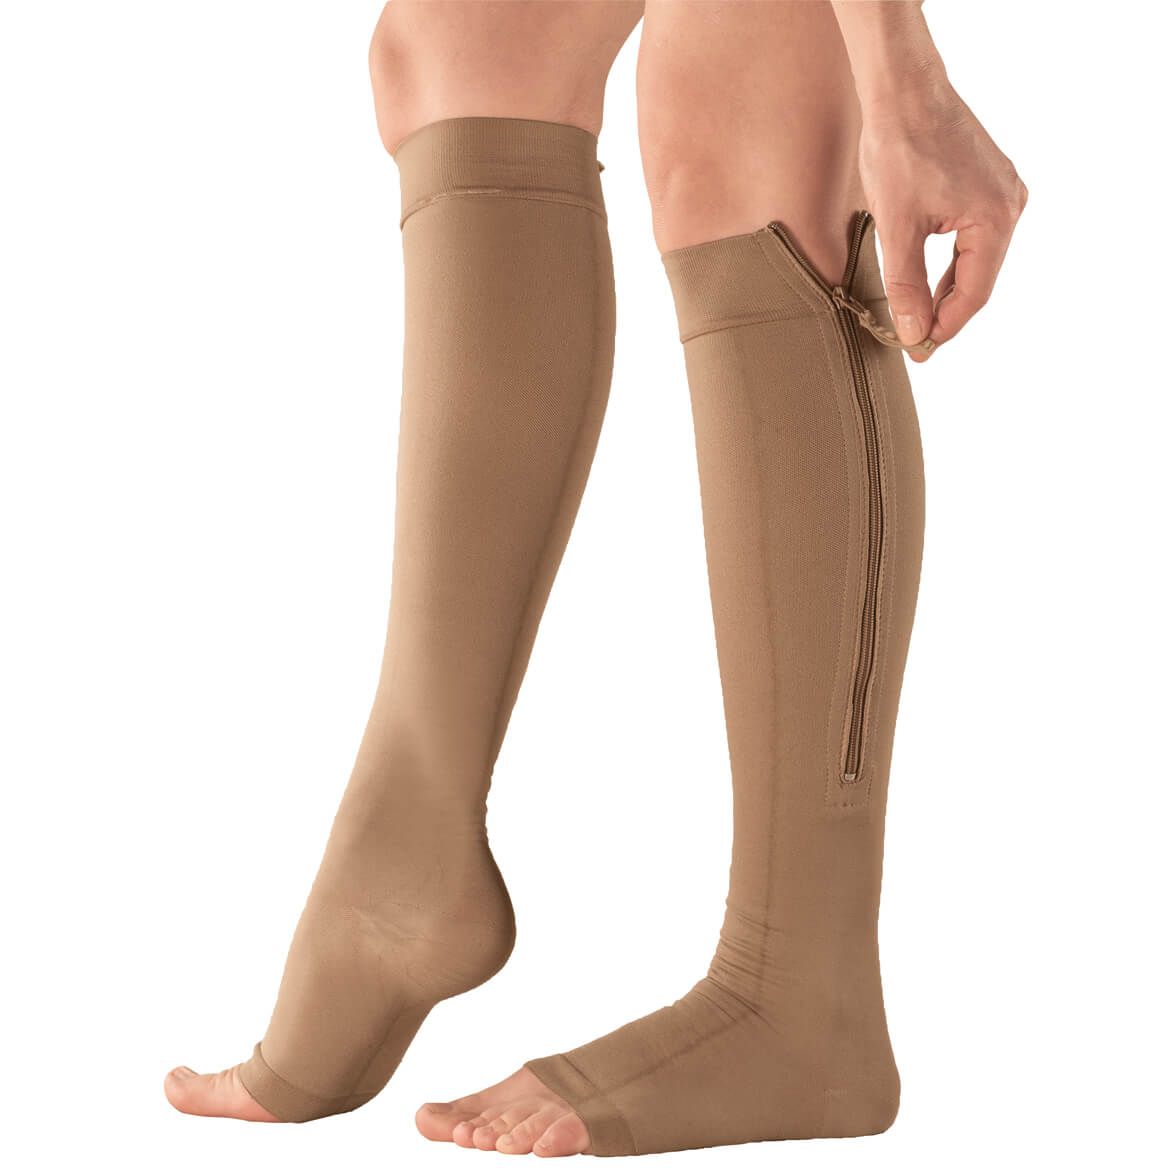  2 Pairs Open Toe Thigh High Zipper Compression Socks 20-30 mmHg  Zipper Compression Stockings for Women Men Swelling Edema (Skin Color,  Large) : Health & Household